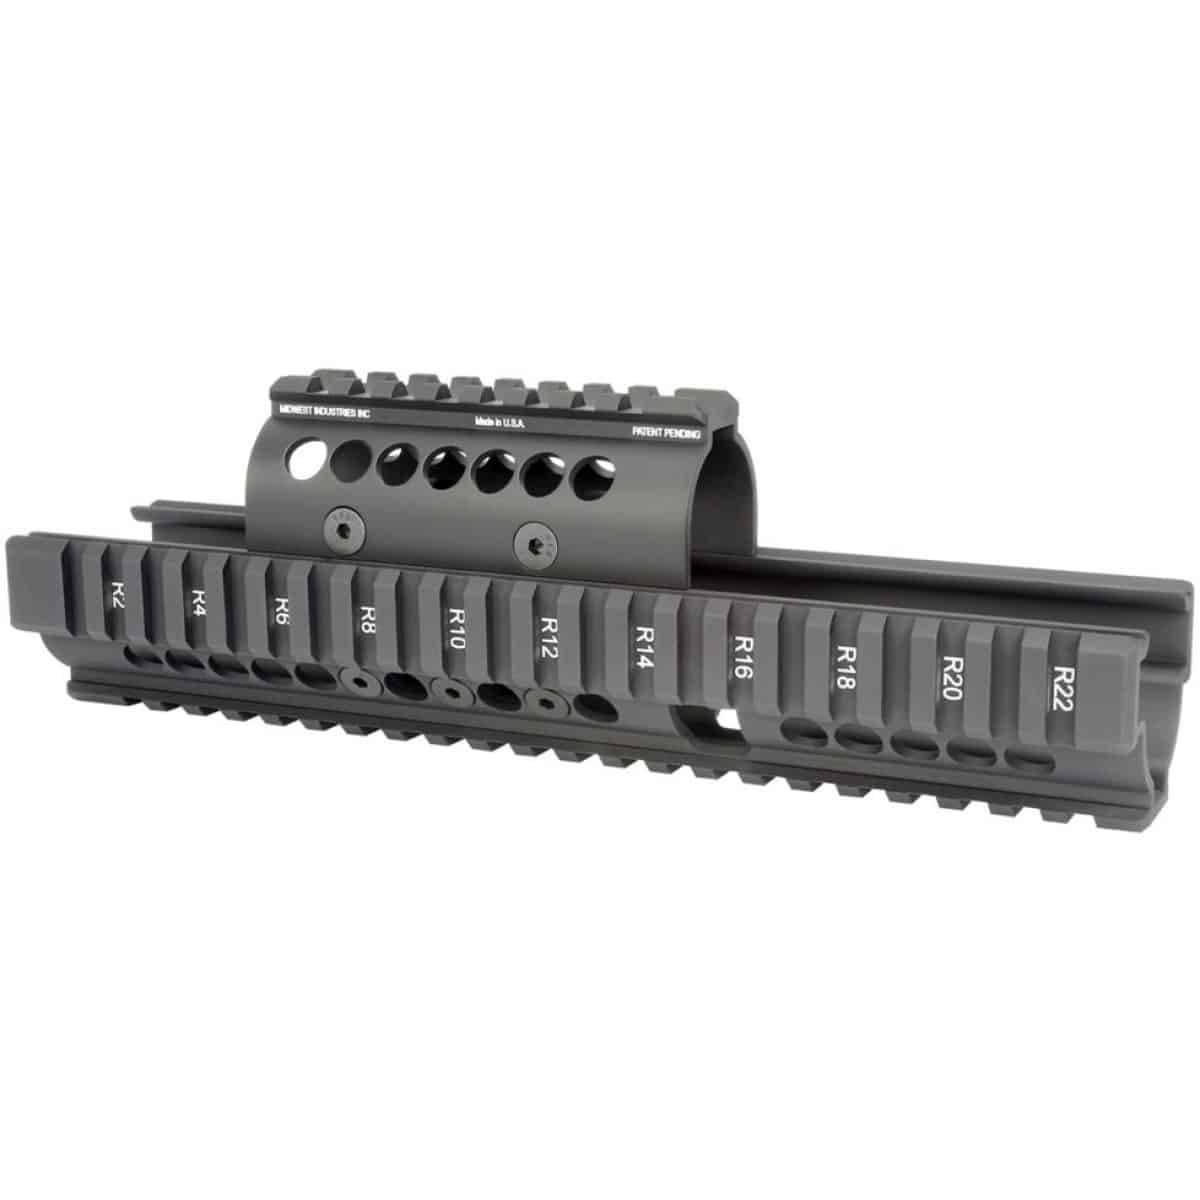 opplanet midwest industries extended ak47 74 universal handguard with standard topcover mi ak x main